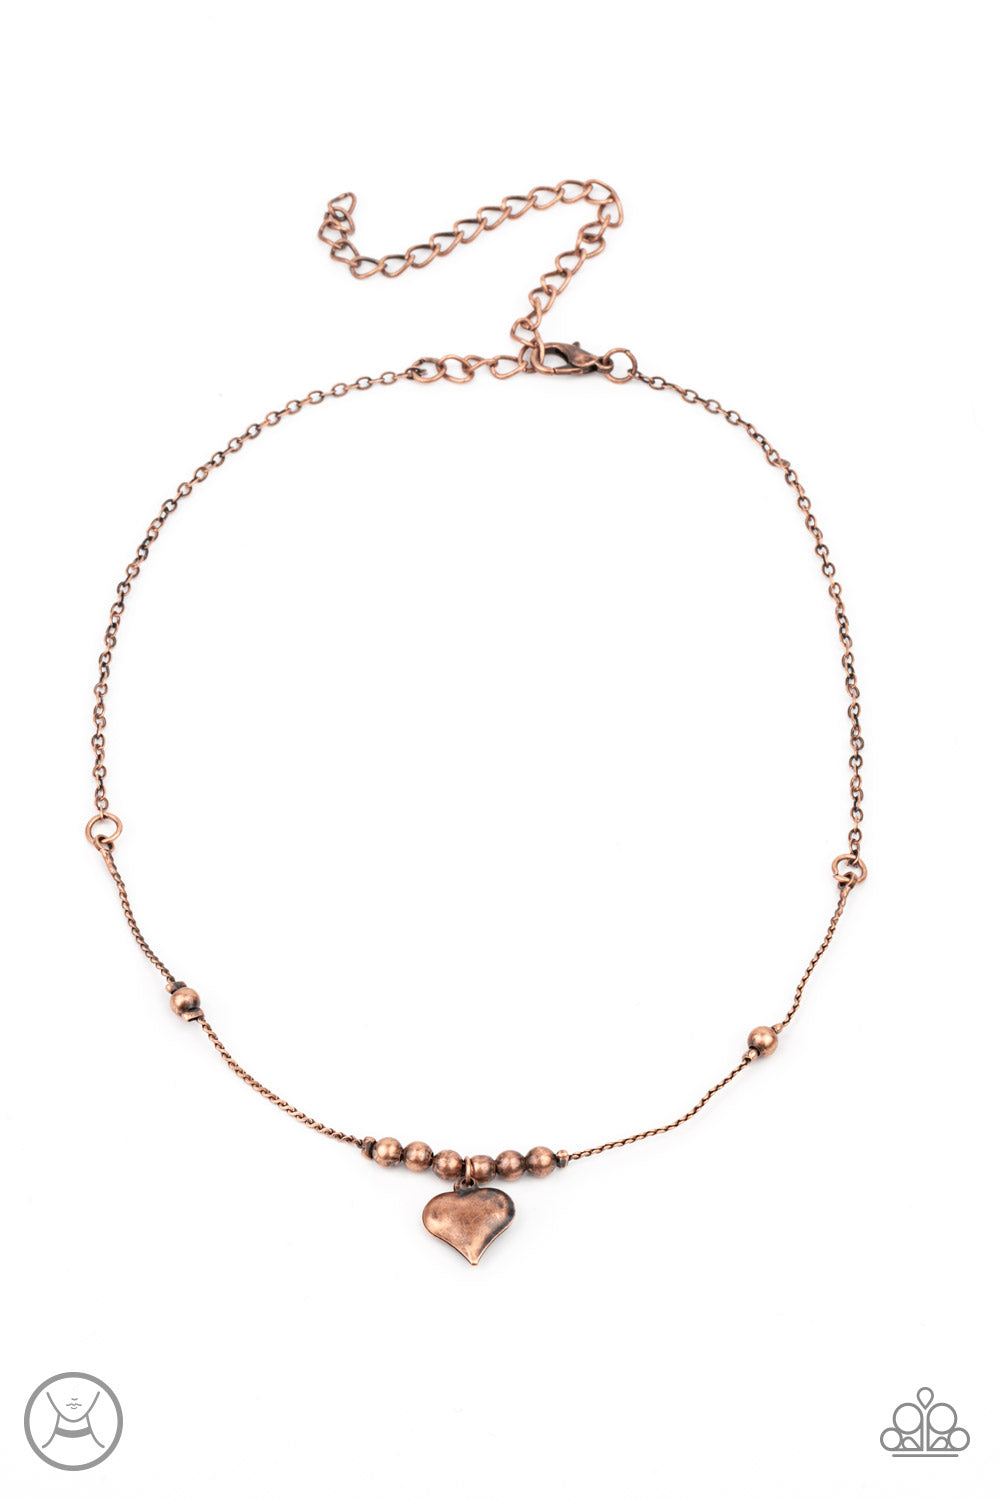 Casual Crush Copper Choker Necklace - Paparazzi Accessories  Infused with dainty copper beads, a charming copper heart dangles from a wire-like chain around the neck for a flirtatious look. Features an adjustable clasp closure.  All Paparazzi Accessories are lead free and nickel free!  Sold as one individual choker necklace. Includes one pair of matching earrings.